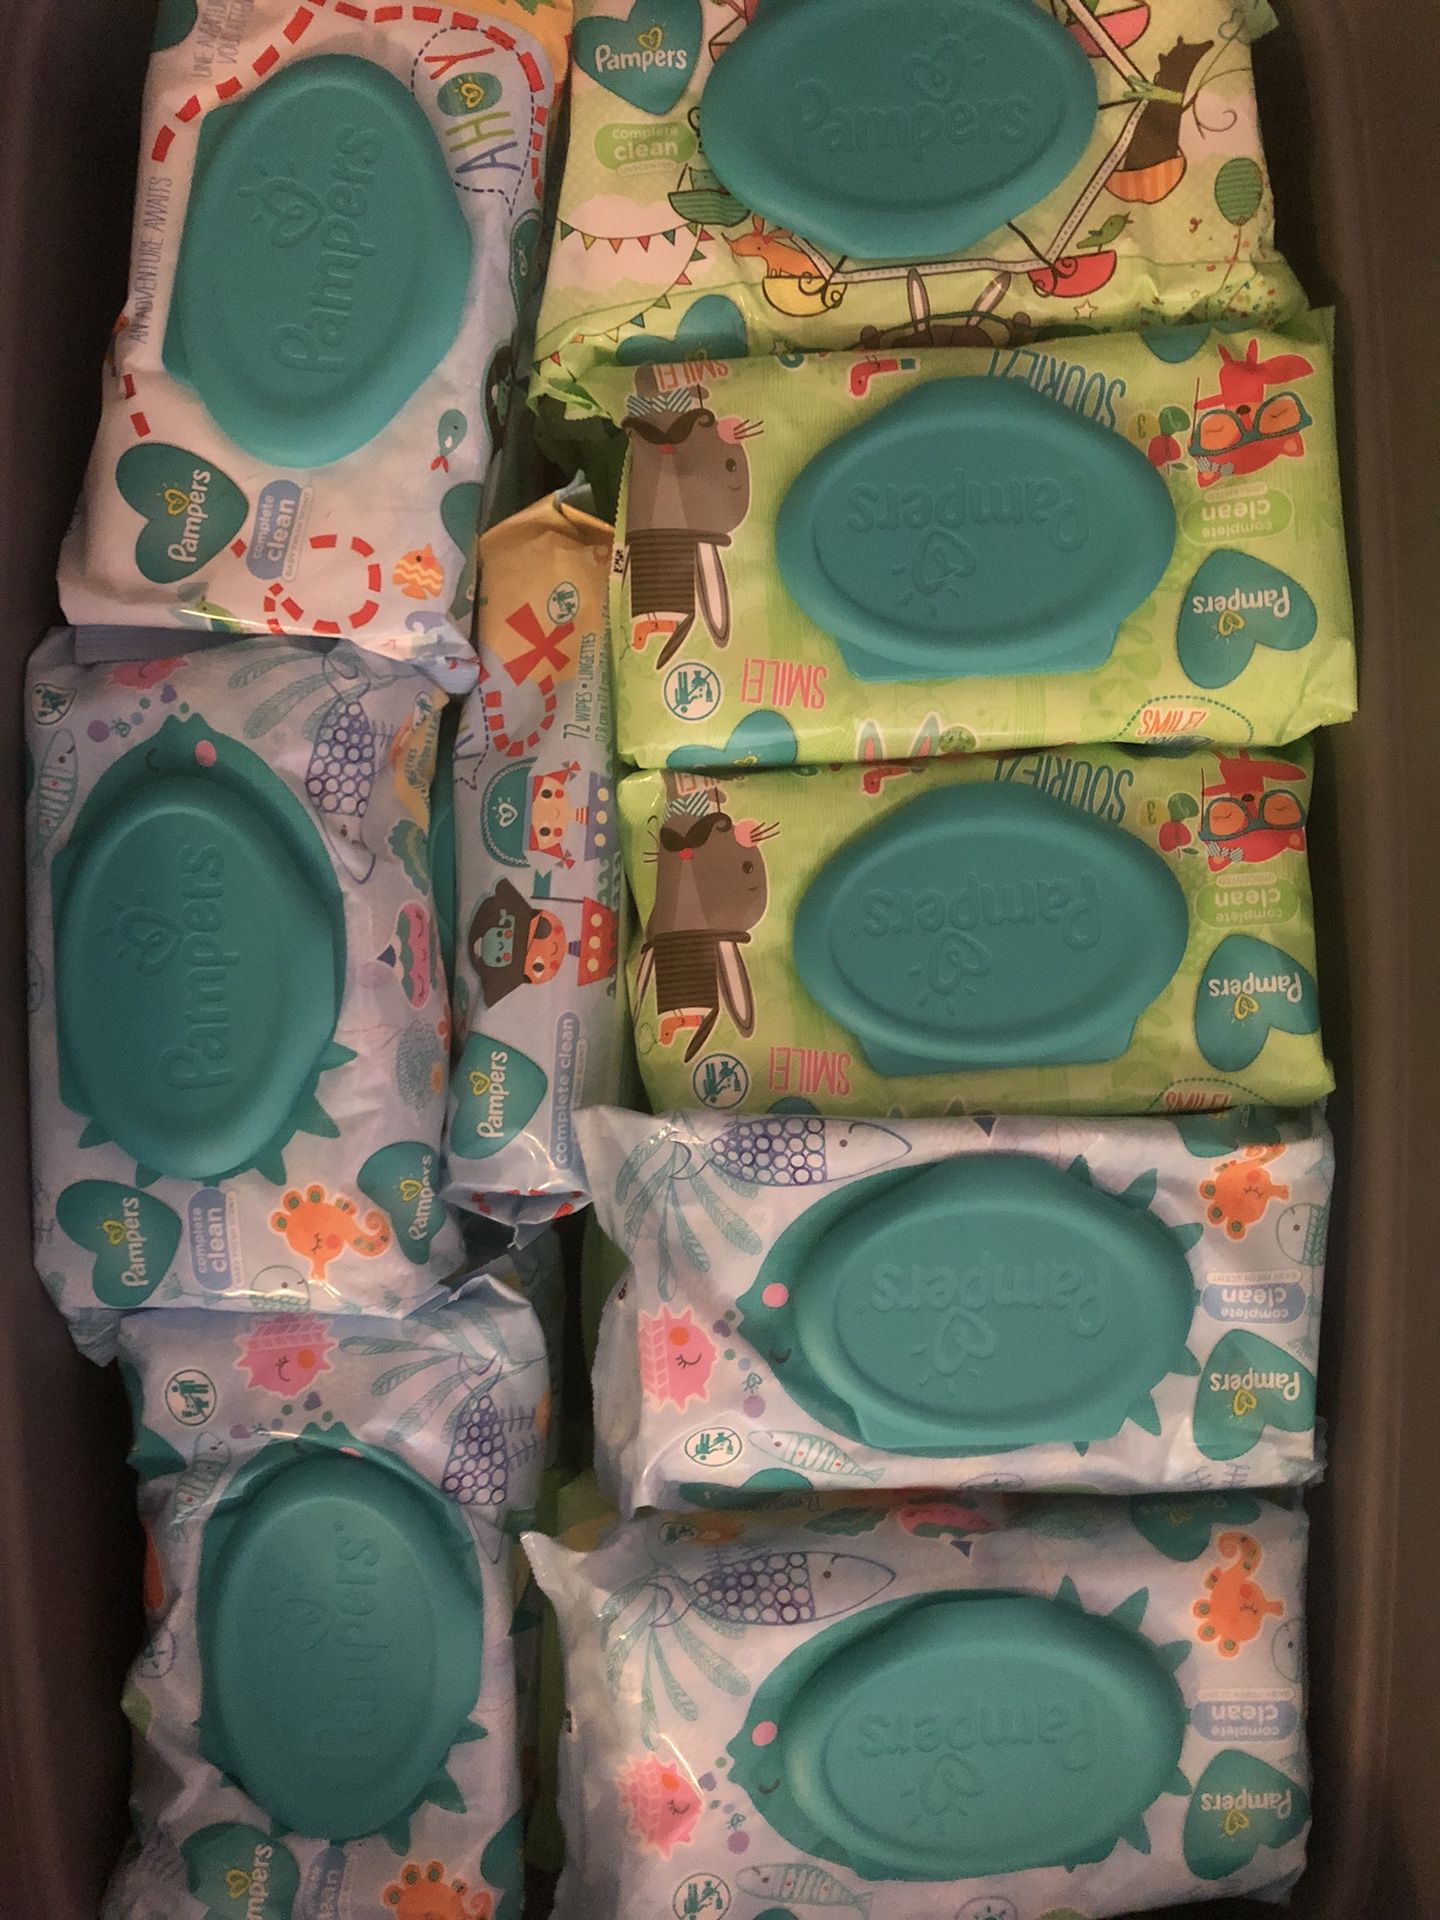 Assorted Pampers wipes